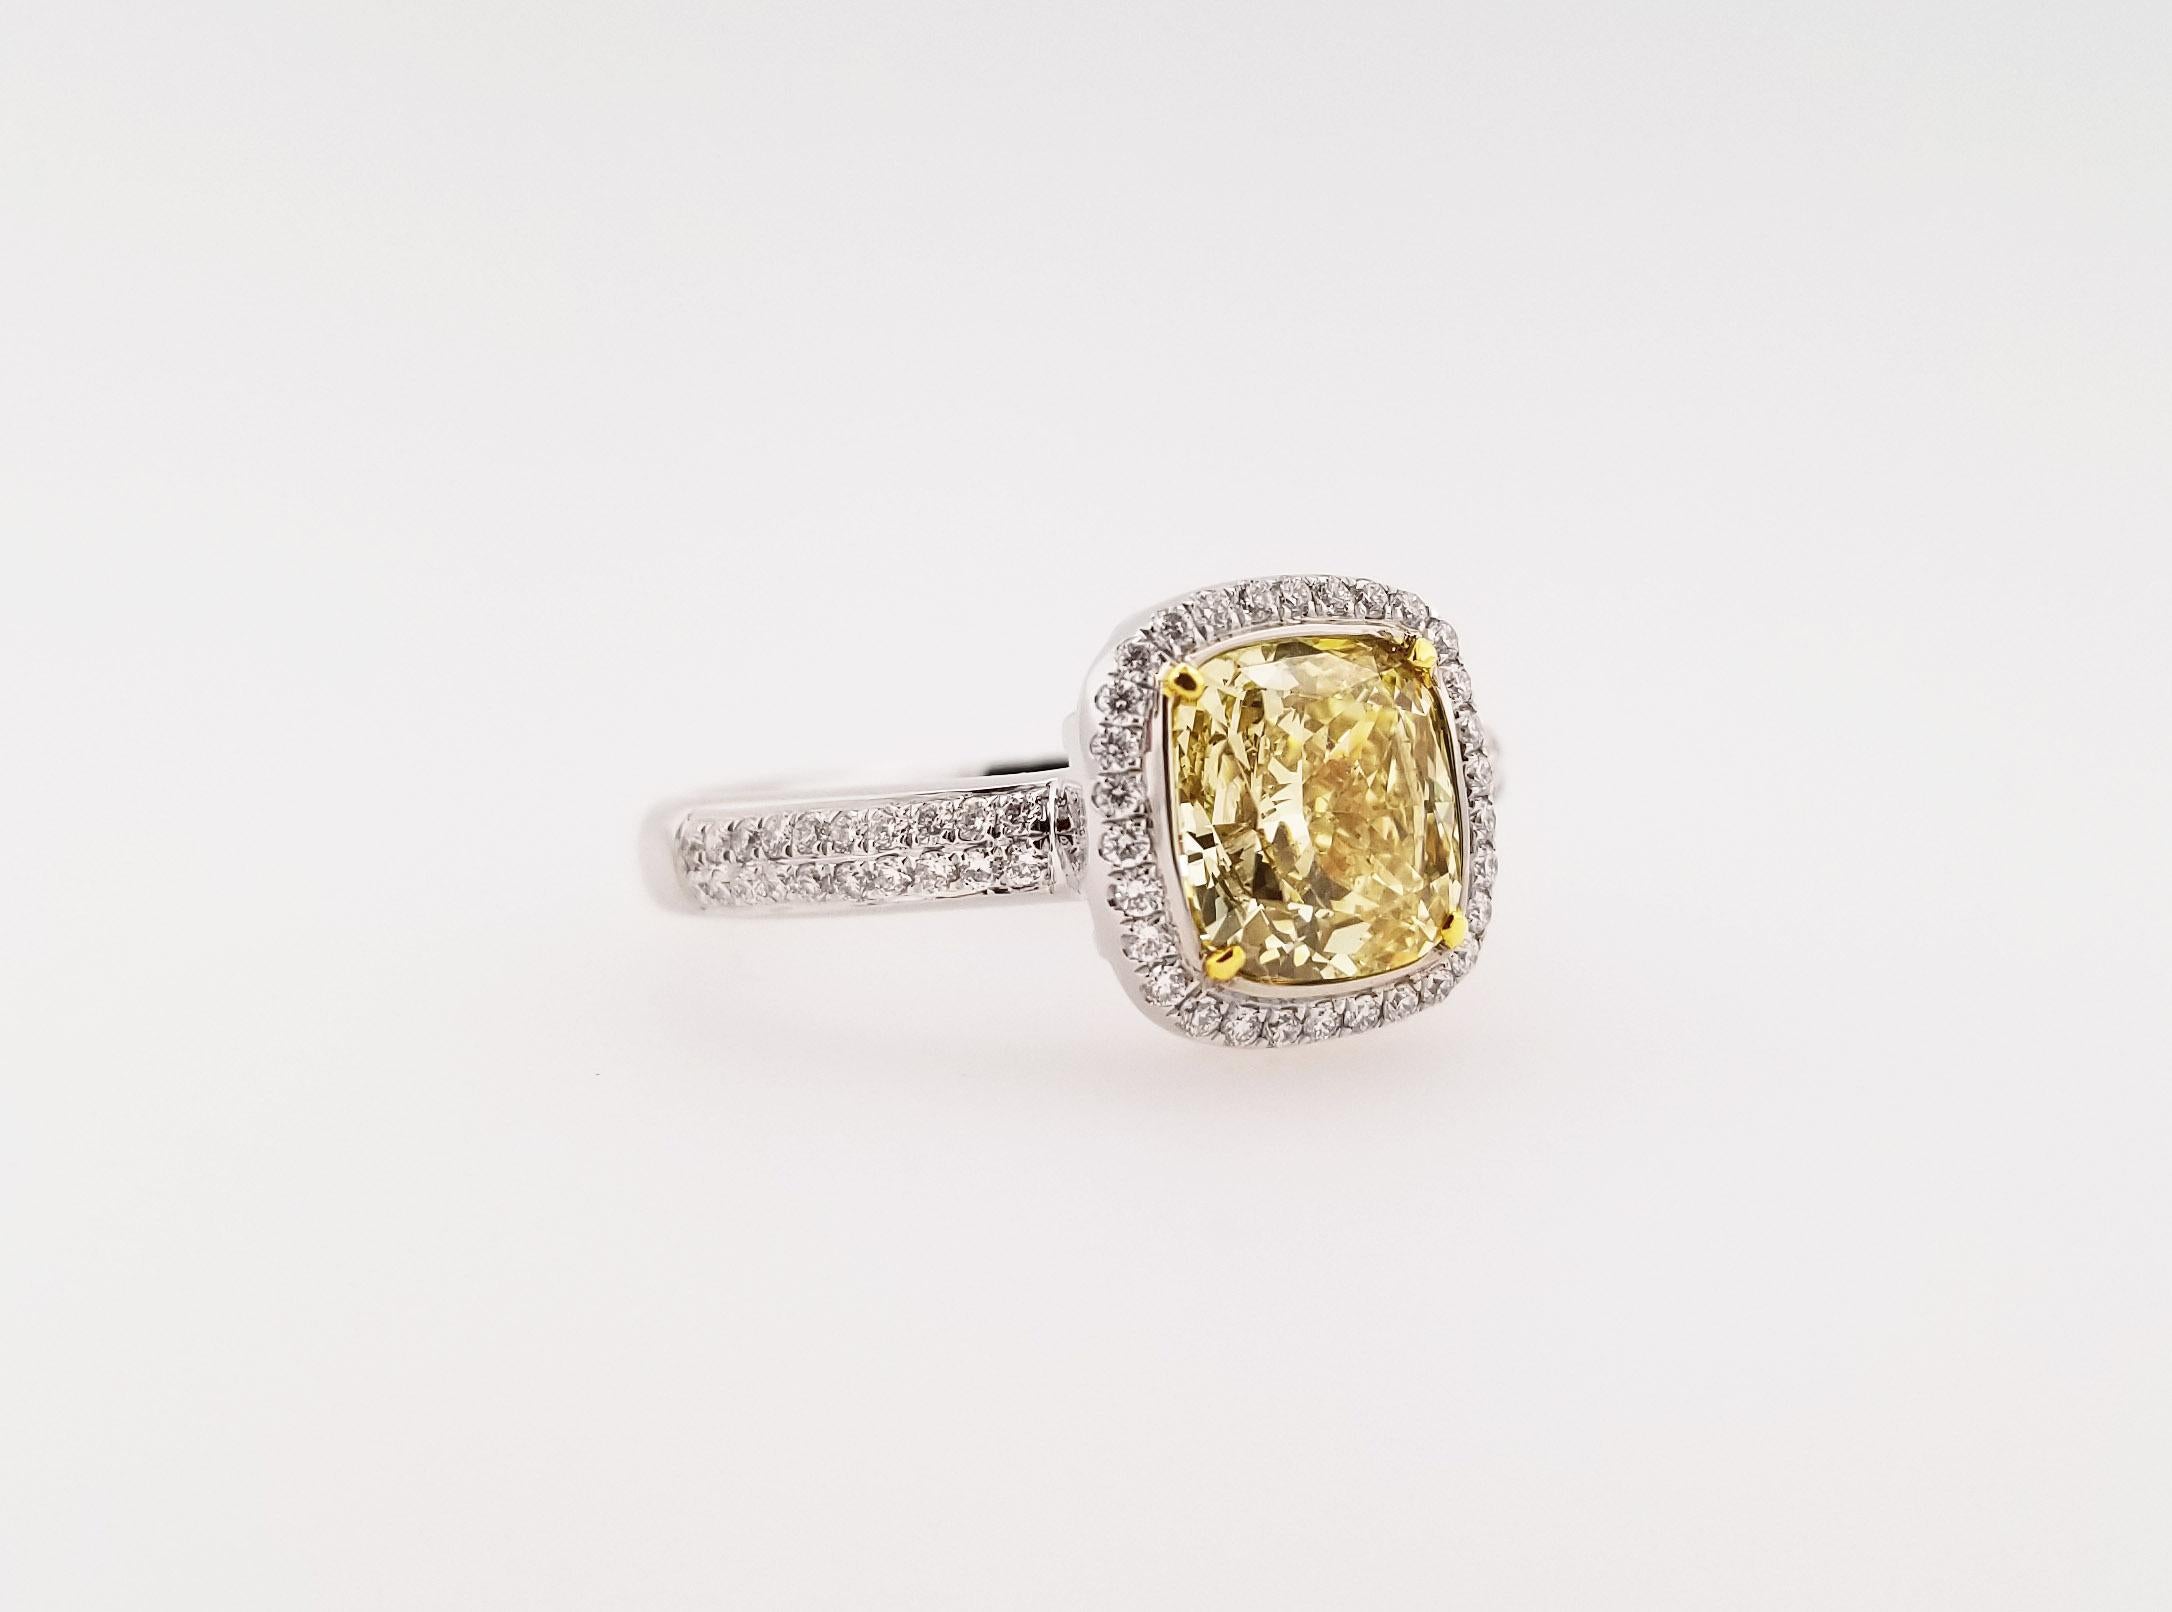 2.01 Carat Cushion-Cut Fancy Light Yellow GIA-Certified Diamond Engagement Ring from Scarselli. An SI1 center stone is flanked by a row of white round diamonds in a halo-setting, set upon an 18K White Gold ring. The side stones TCW is 0.26 carats